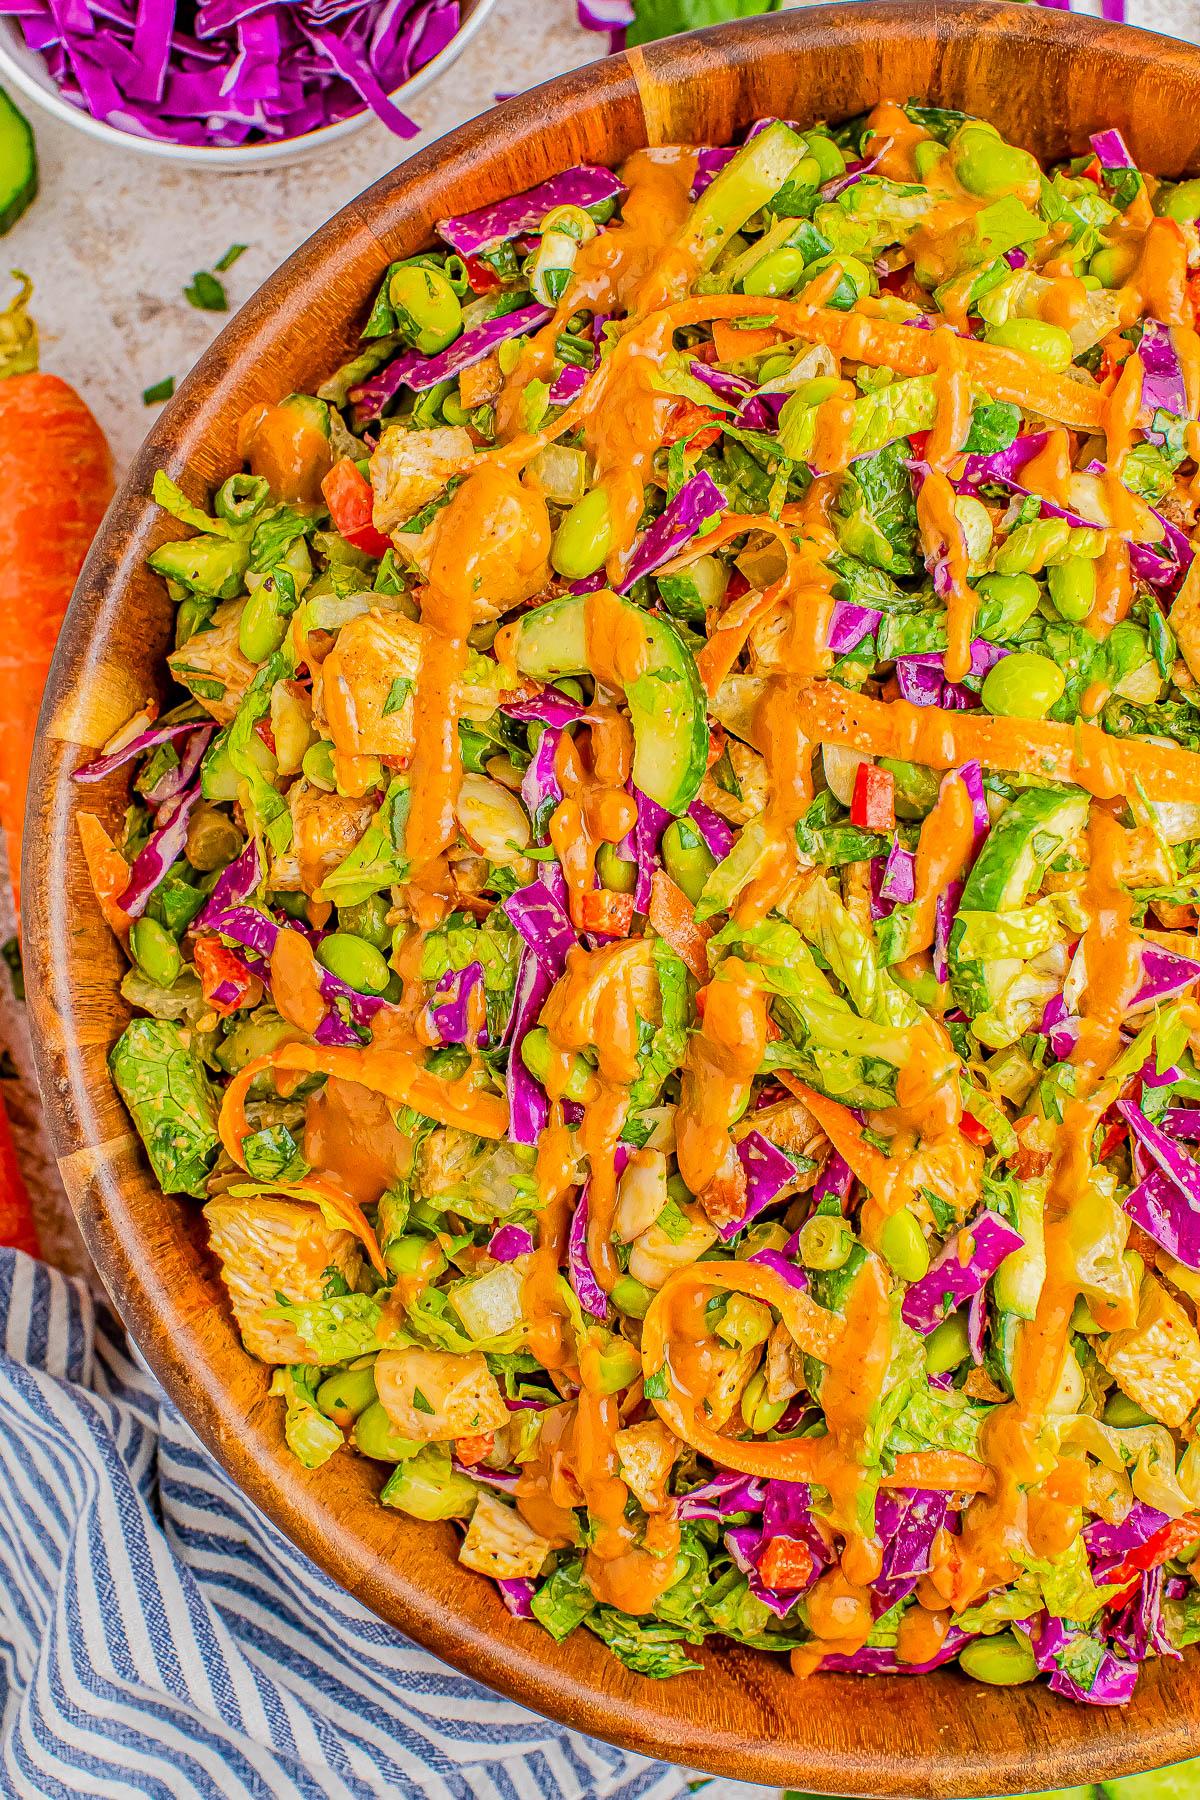 A vibrant salad in a wooden bowl featuring mixed greens, edamame, red cabbage, cucumbers, and carrots, topped with a drizzle of orange dressing.